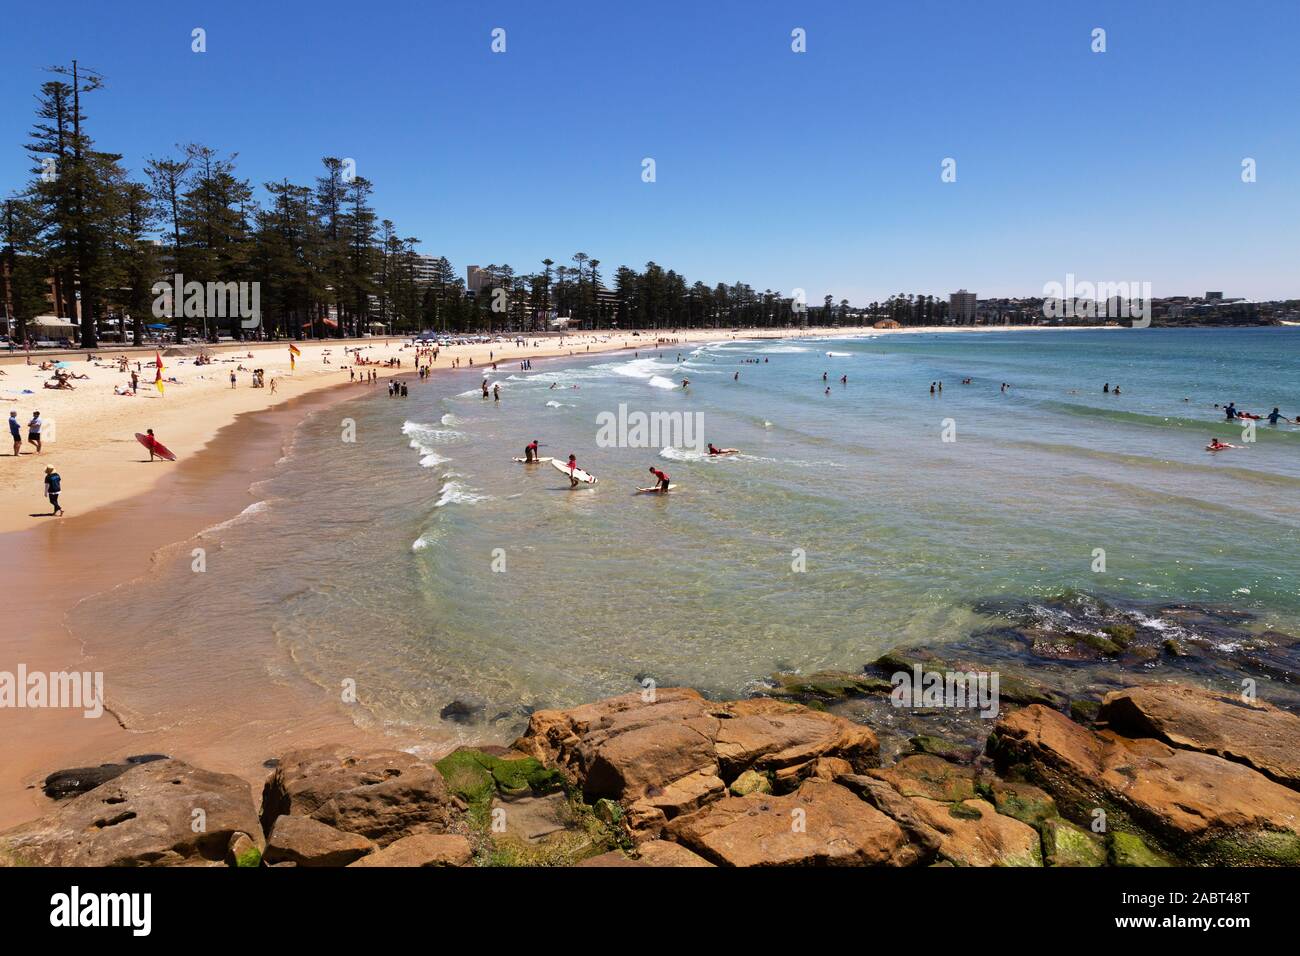 Manly Beach Sydney Australia - view of the beach on a sunny day with people swimming and sunbathing in summer. Manly, Sydney New South Wales Australia Stock Photo